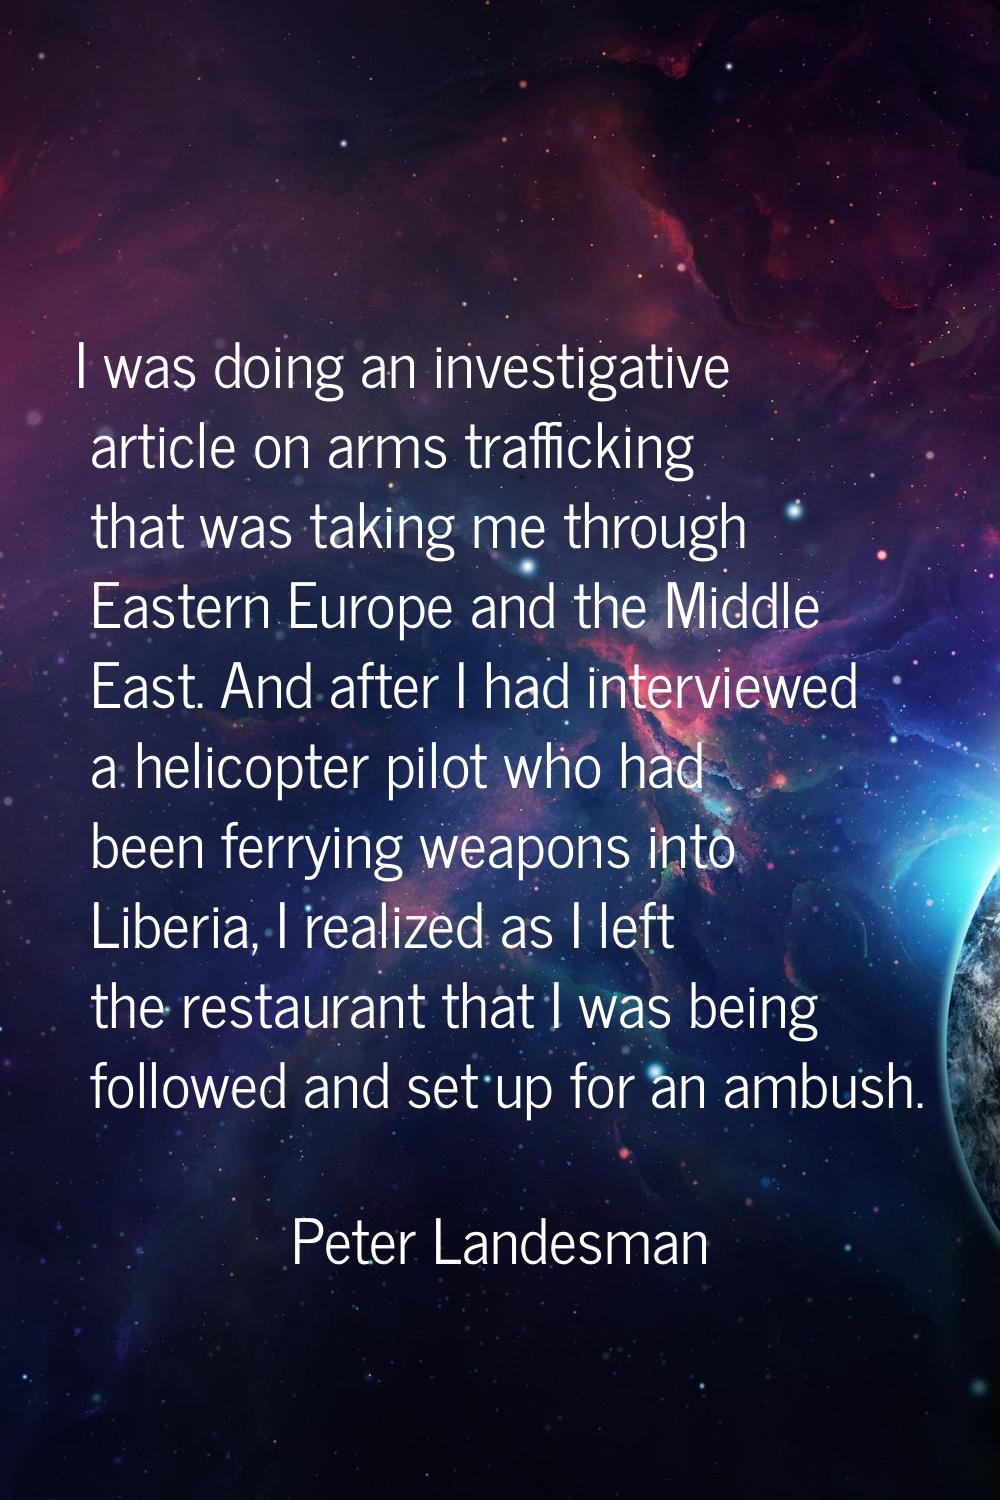 I was doing an investigative article on arms trafficking that was taking me through Eastern Europe 